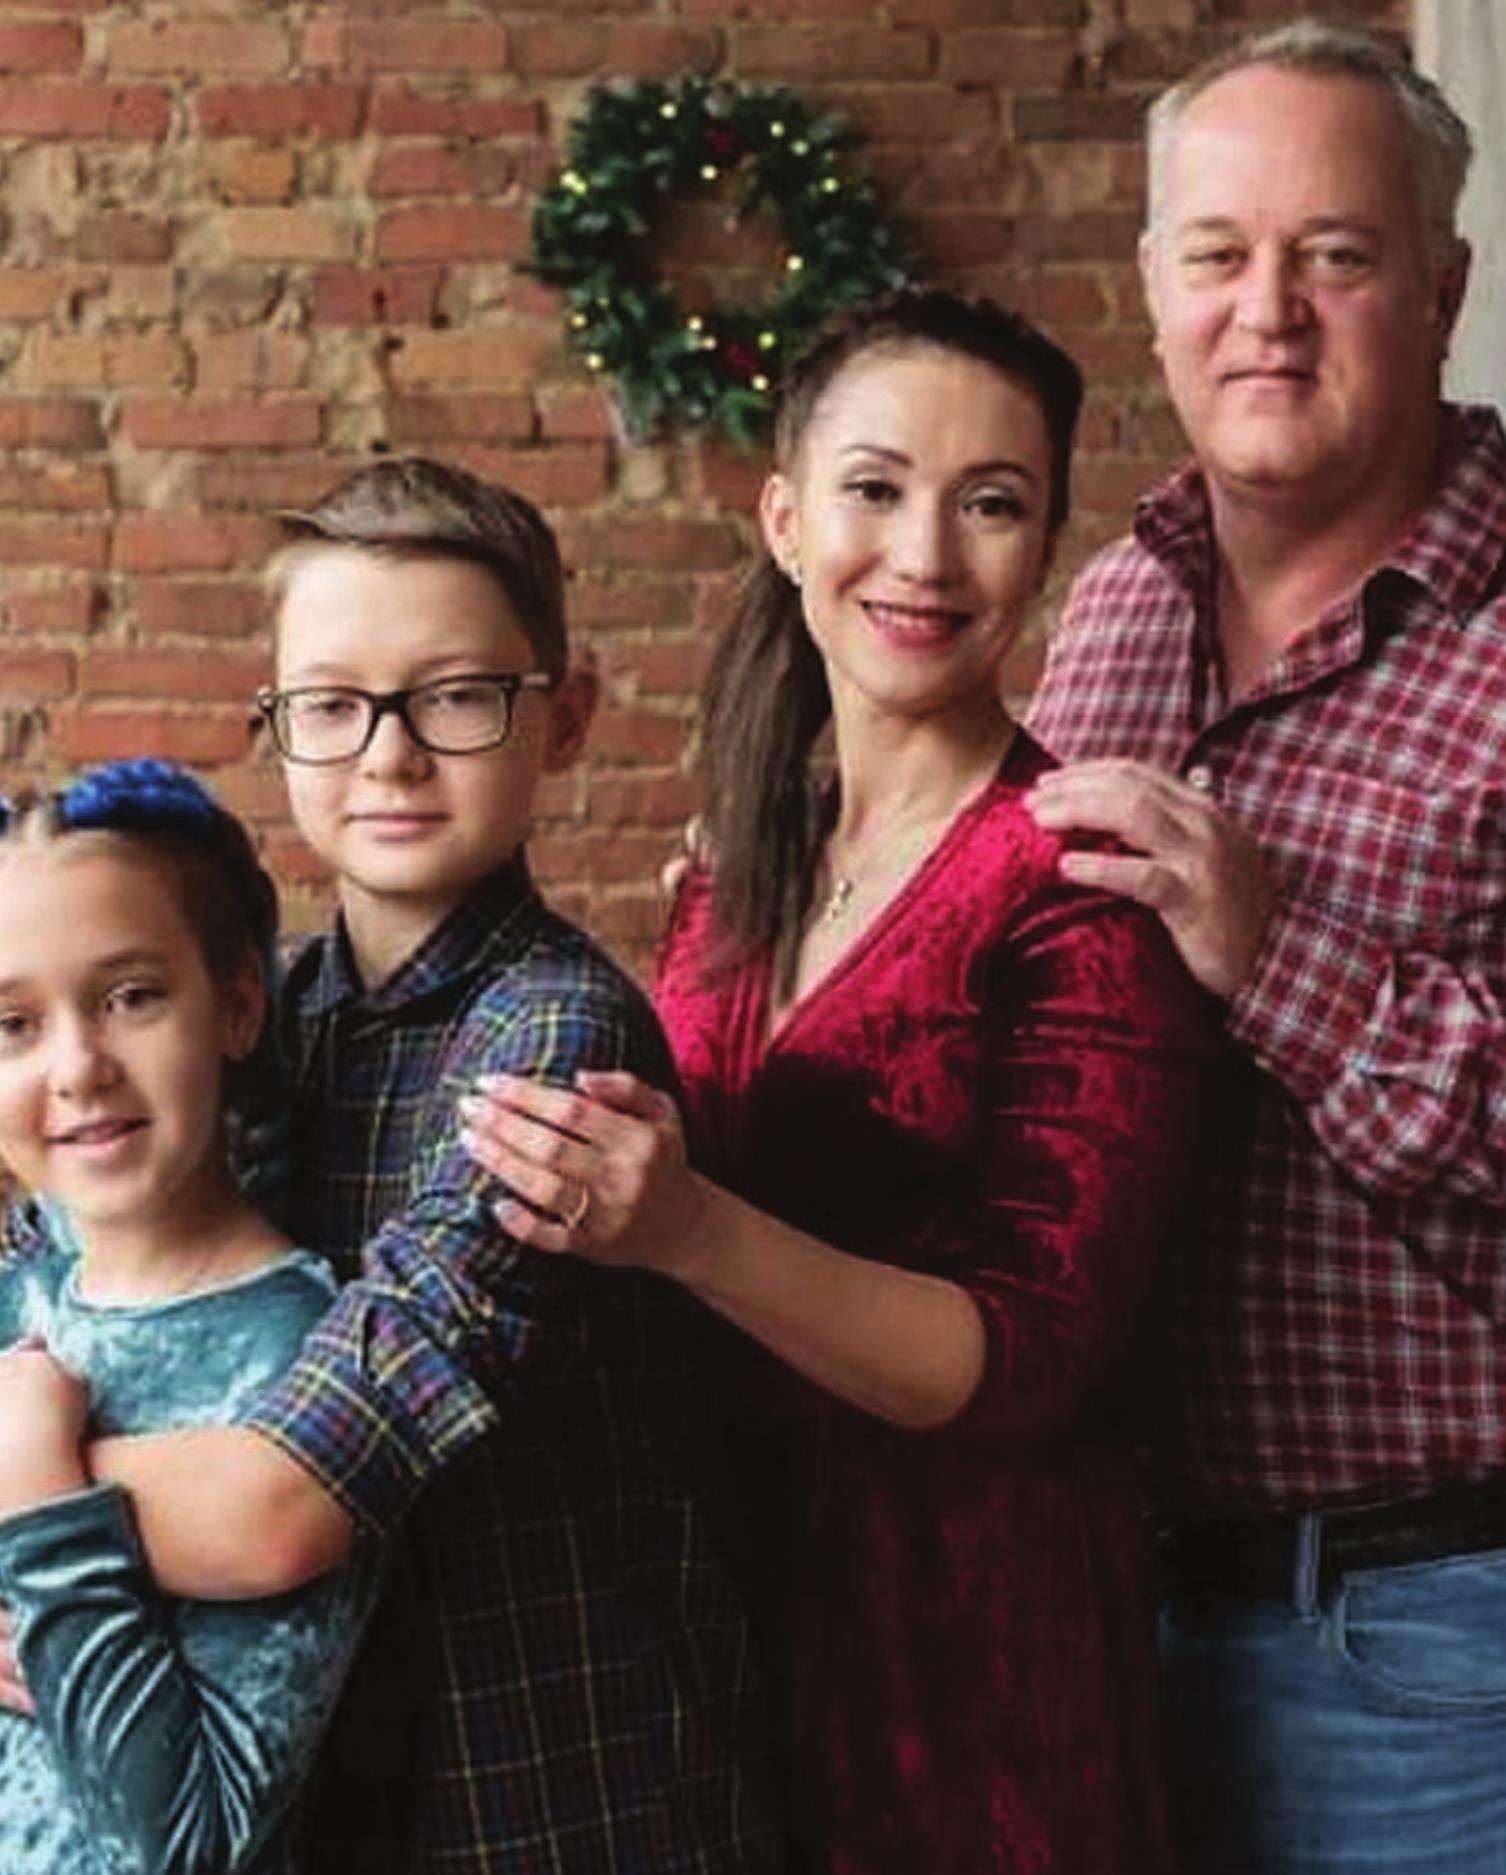 Nataliia Duren is pictured here with her family in the U.S. and her family back in Kherson. Provided